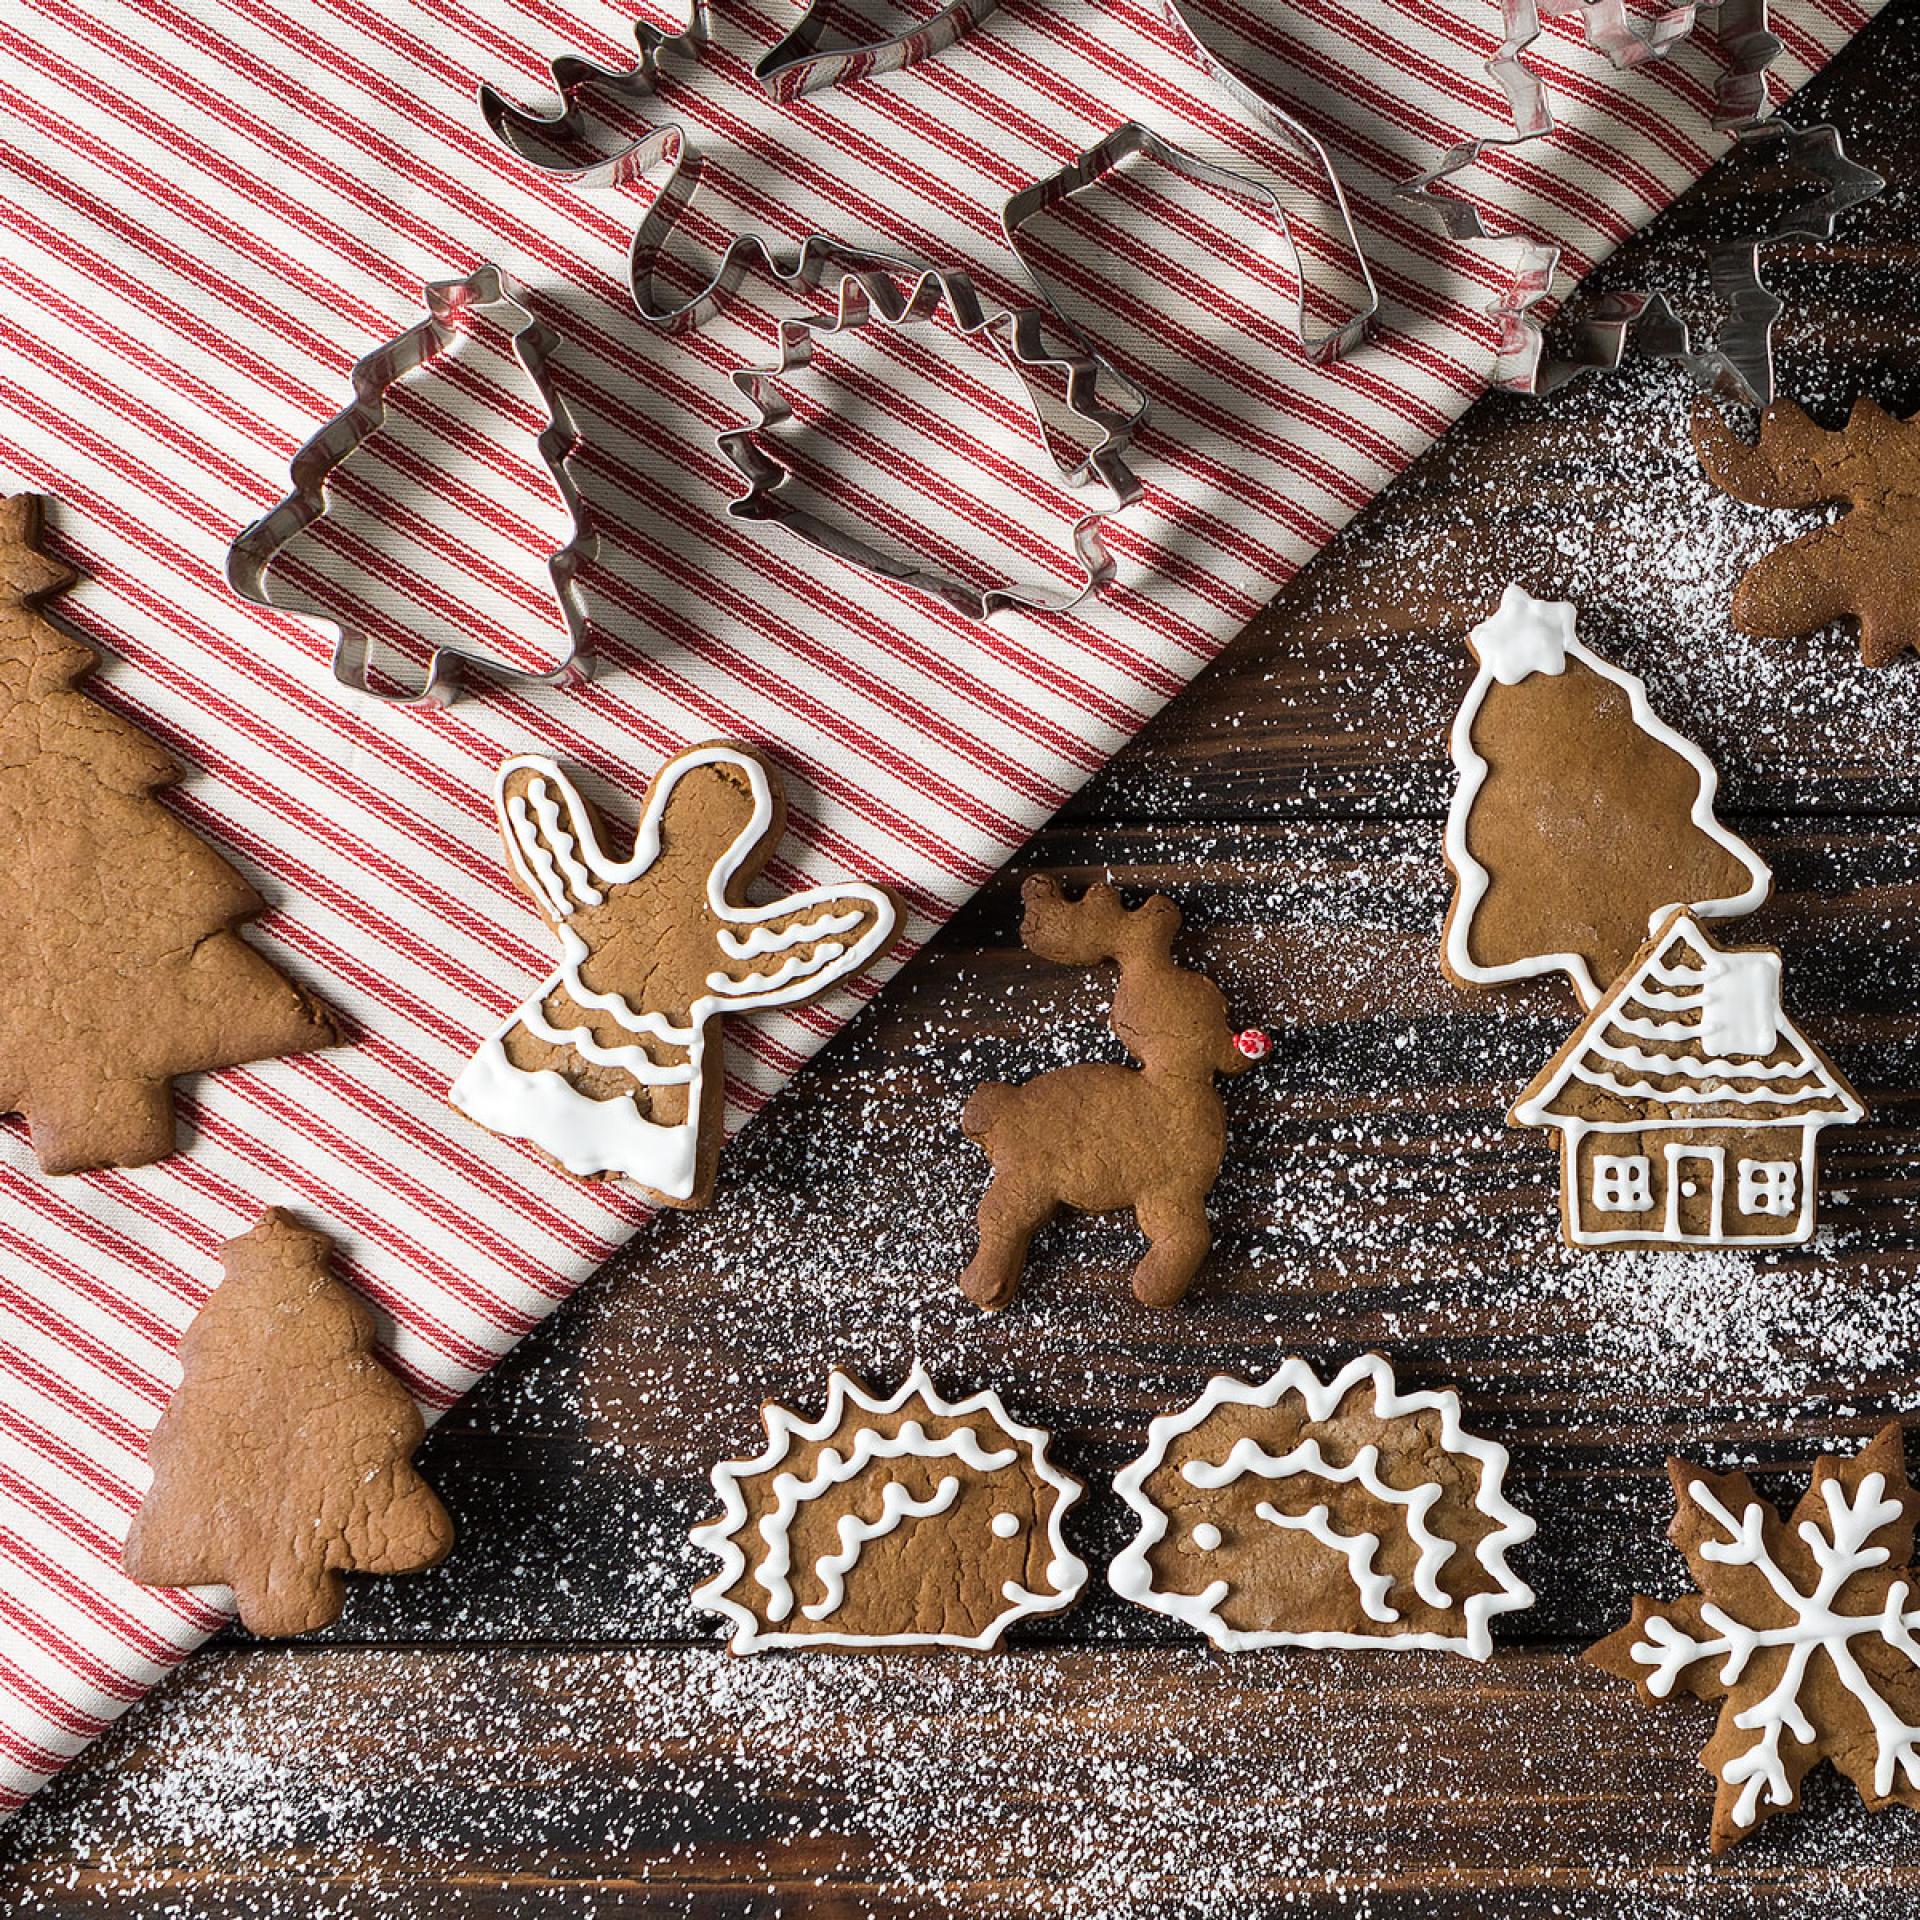 gingerbread cookies with cookie cutters and icing